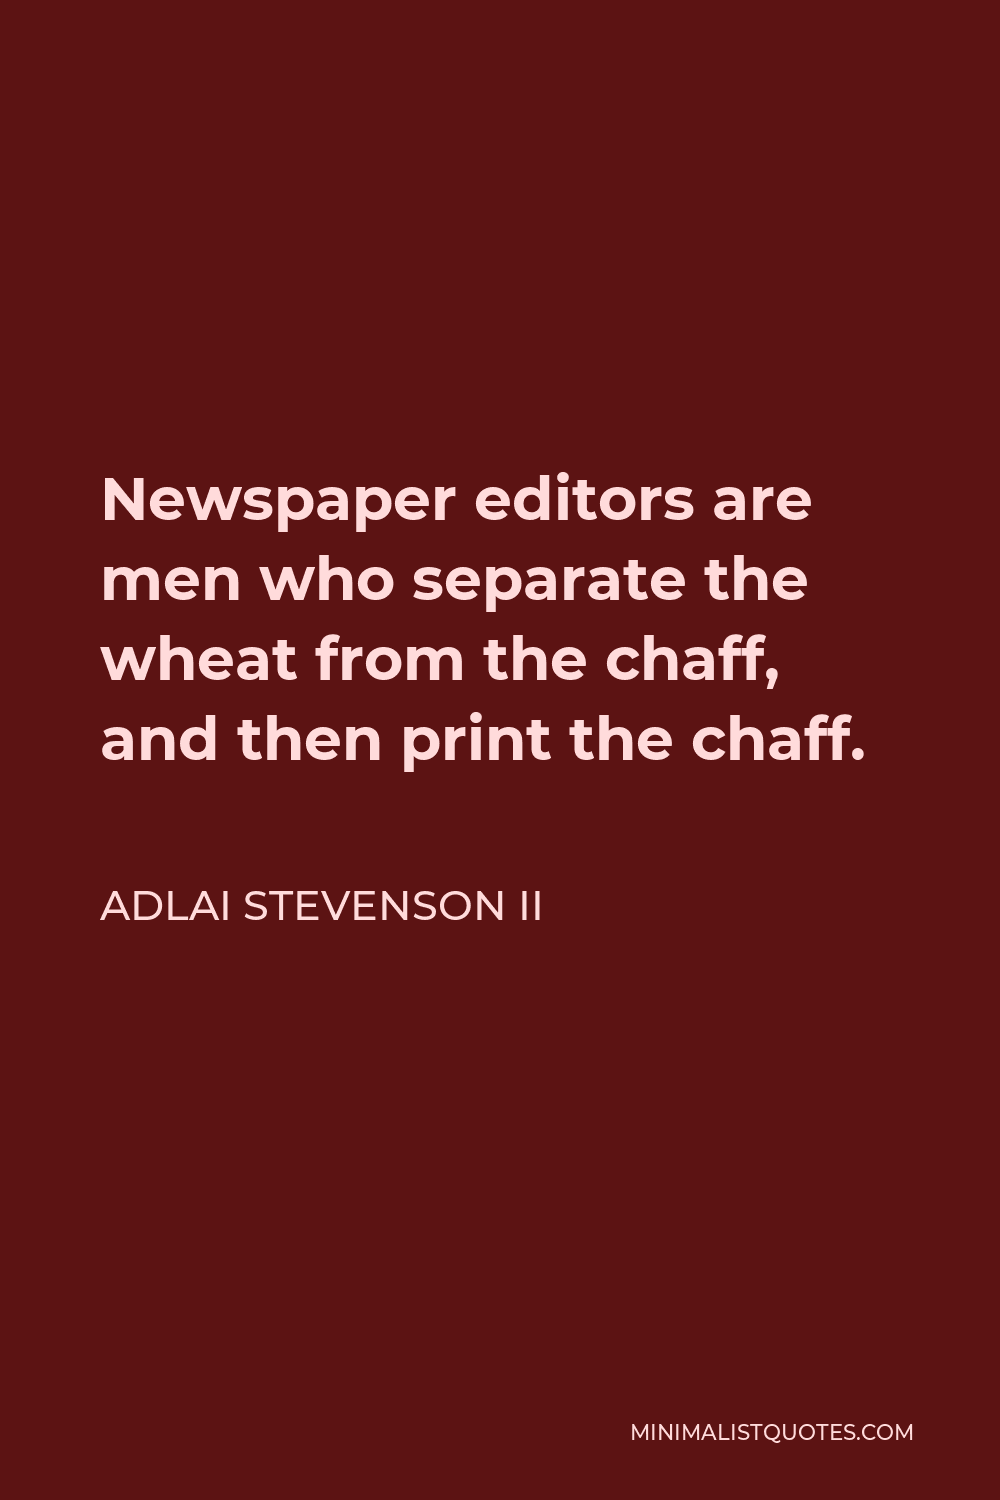 Adlai Stevenson II Quote - Newspaper editors are men who separate the wheat from the chaff, and then print the chaff.